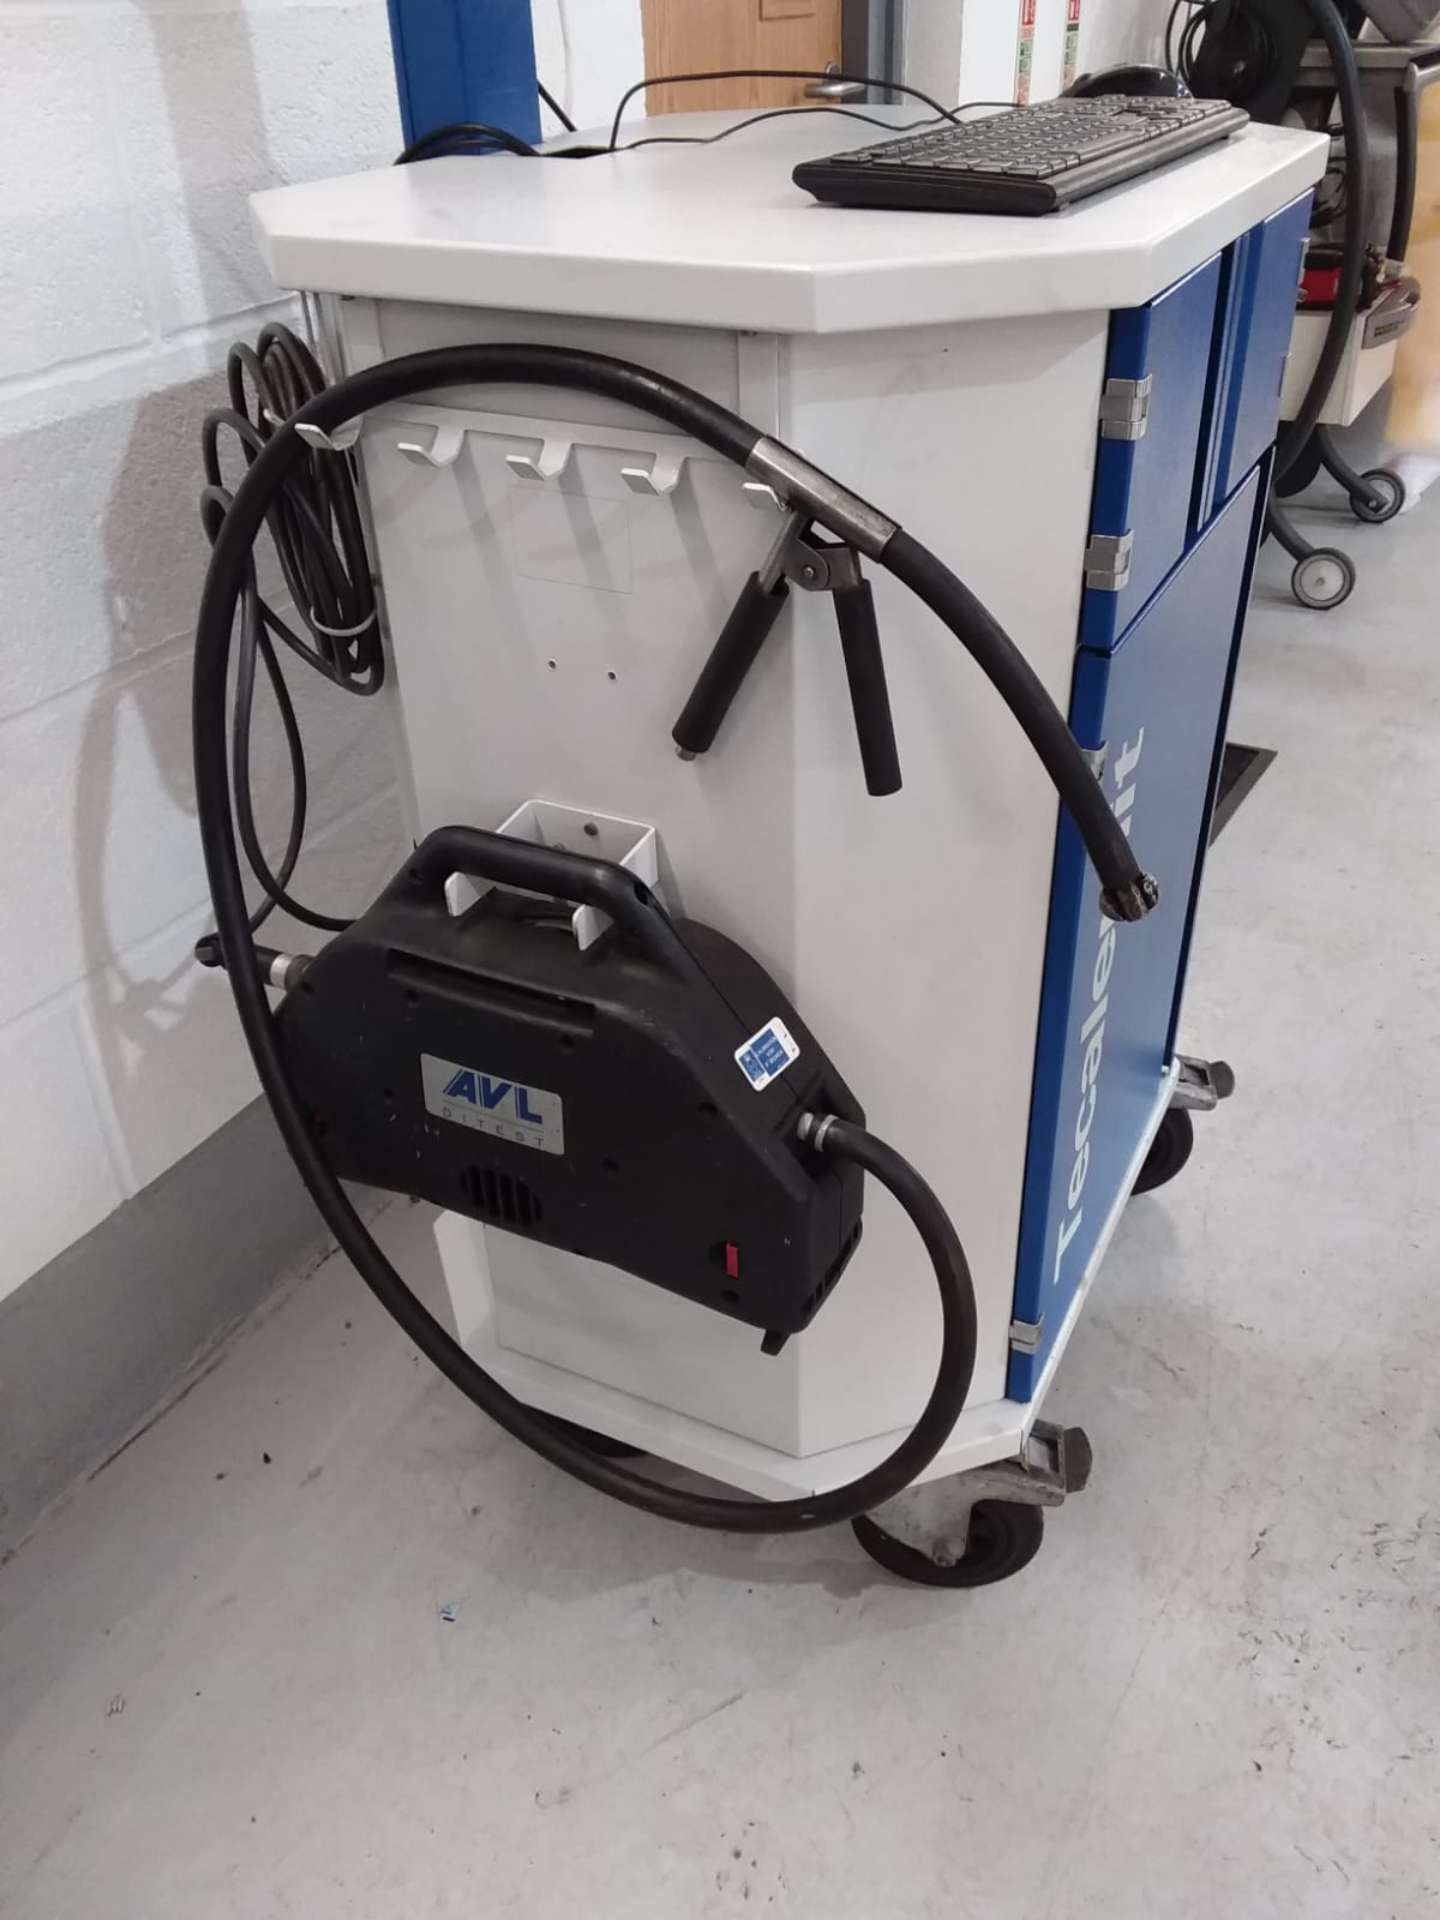 Tecalemit Rolling Road Brake Tester and AVL d-Link gas emission analyser with display read out - Bild 3 aus 10